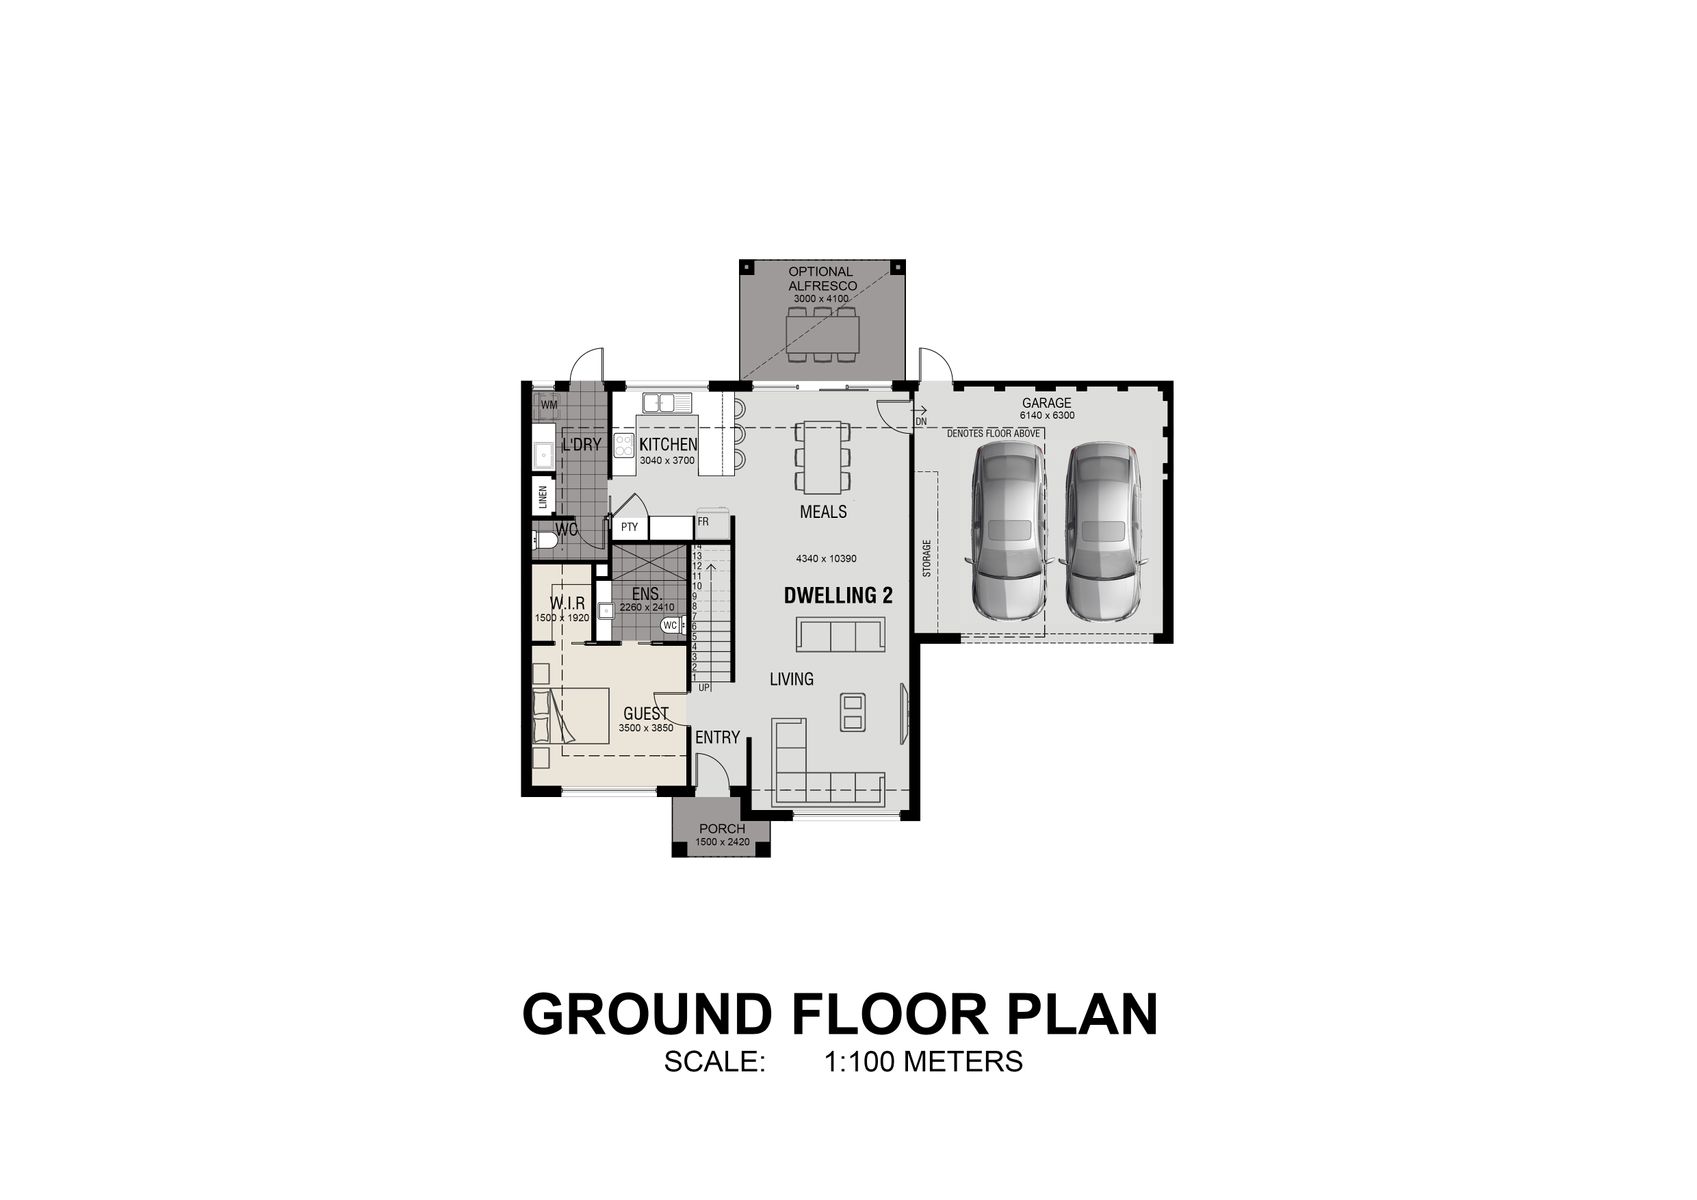 PGS002  2 Kirby Court Dwelling 2 Ground Floor Plan updated 16 07 21